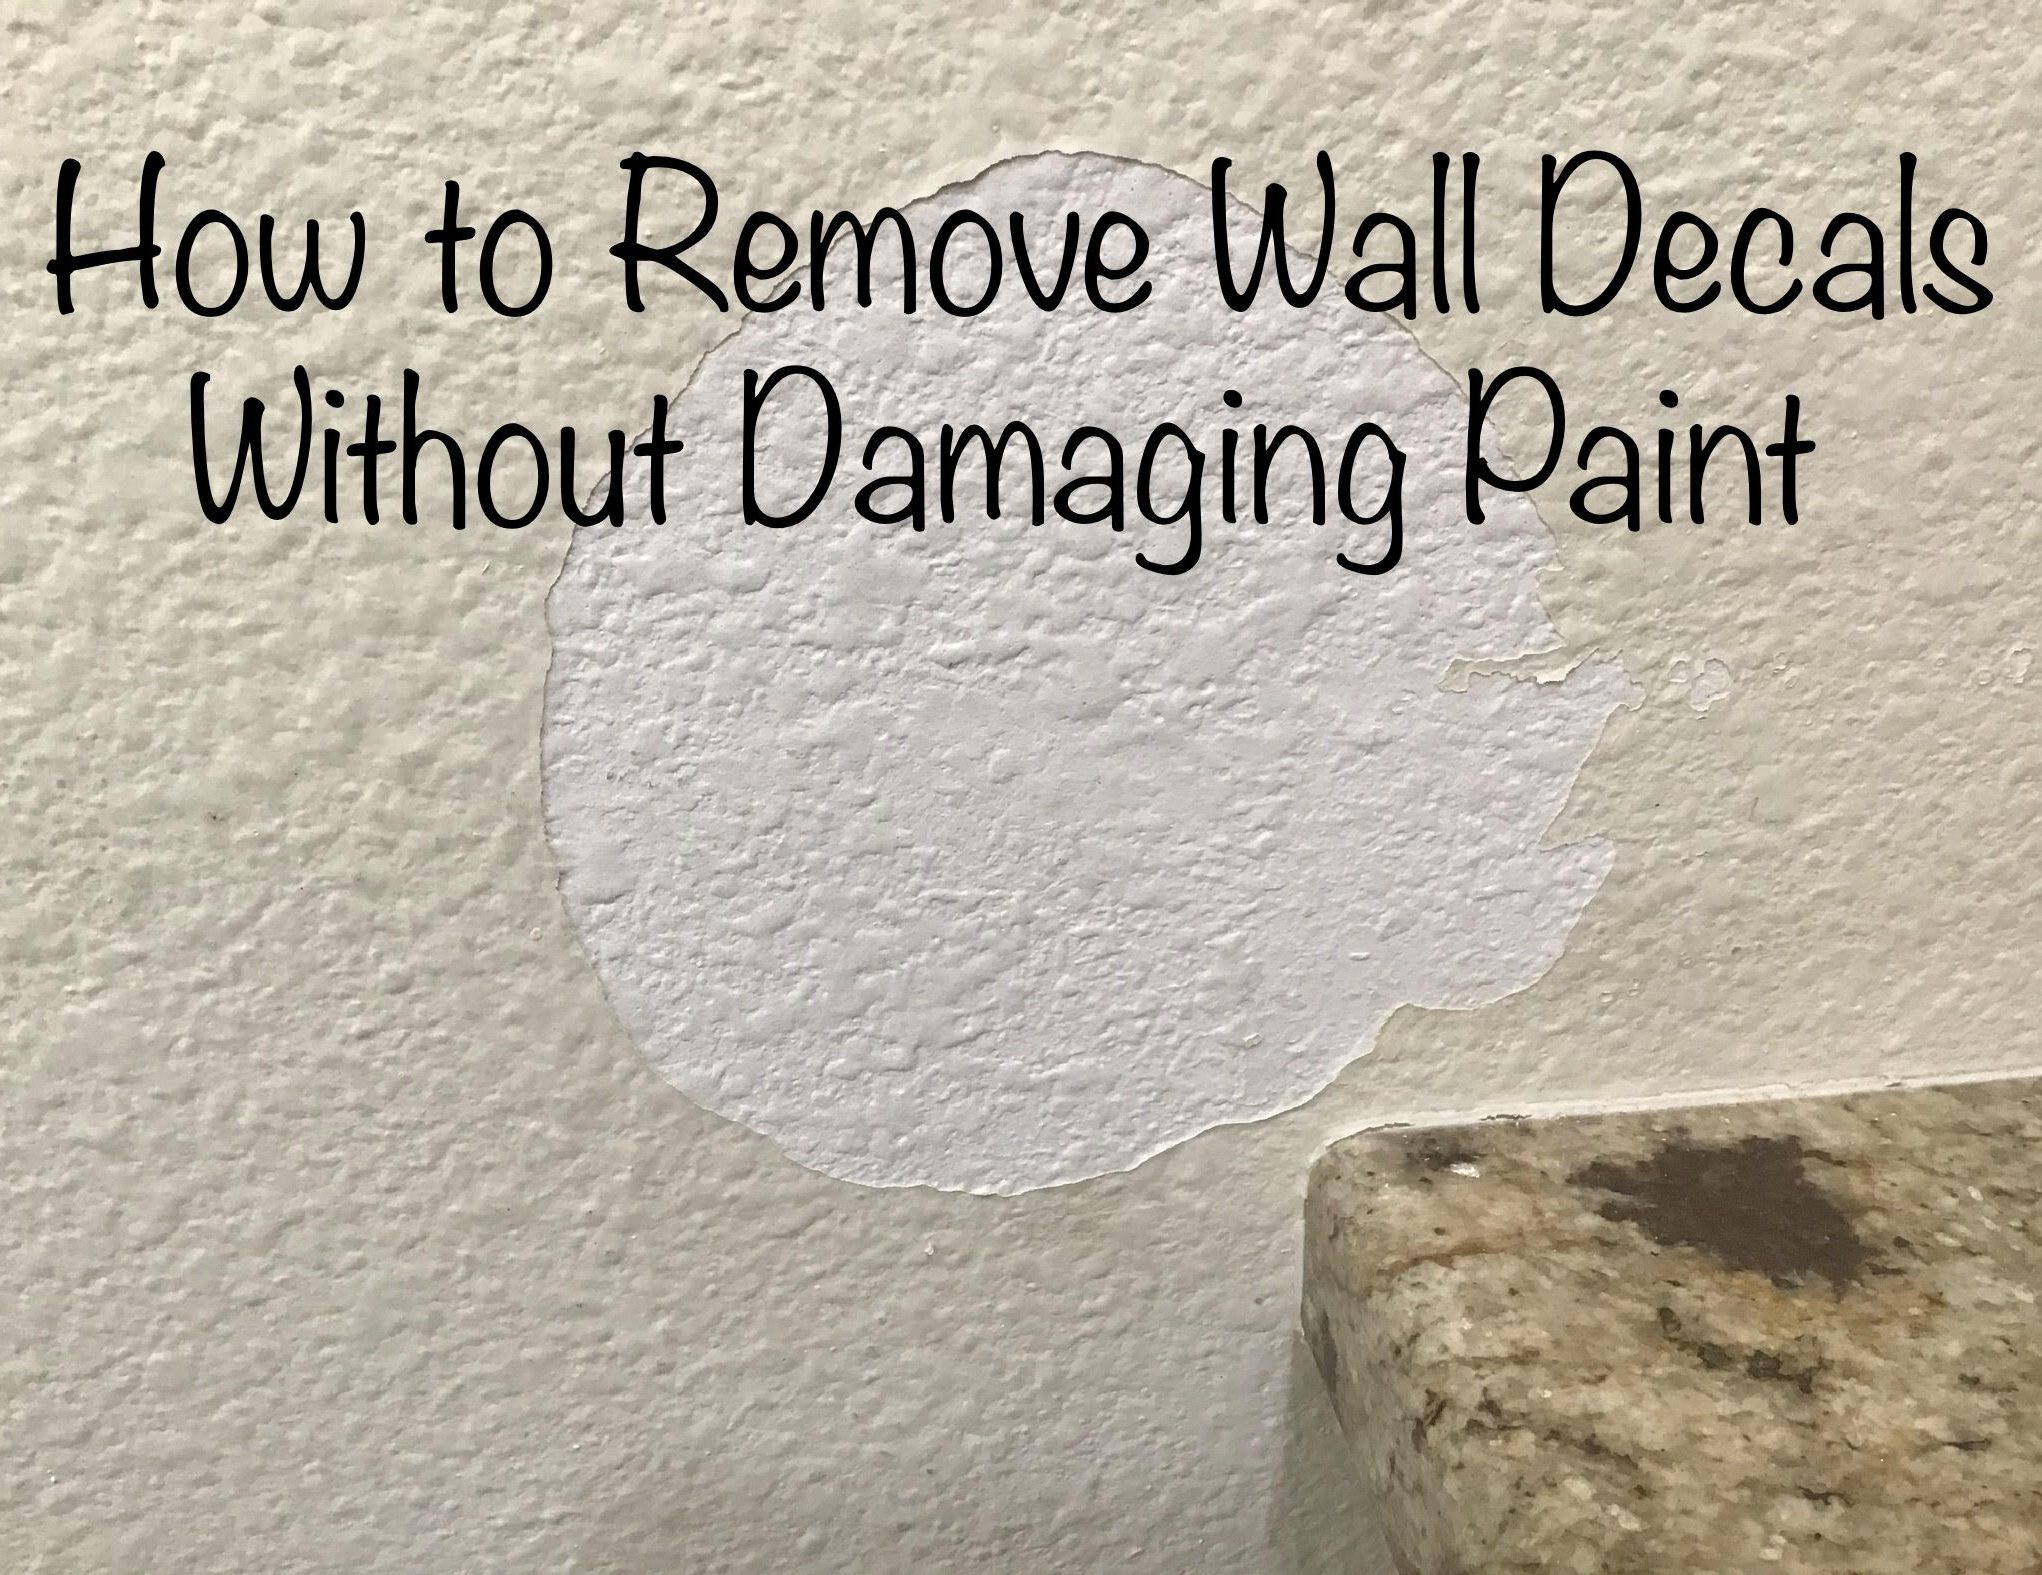 How To Remove Vinyl Sticker How to Remove Wall Decals Without Damaging Paint • Vinyl Wall Expressions